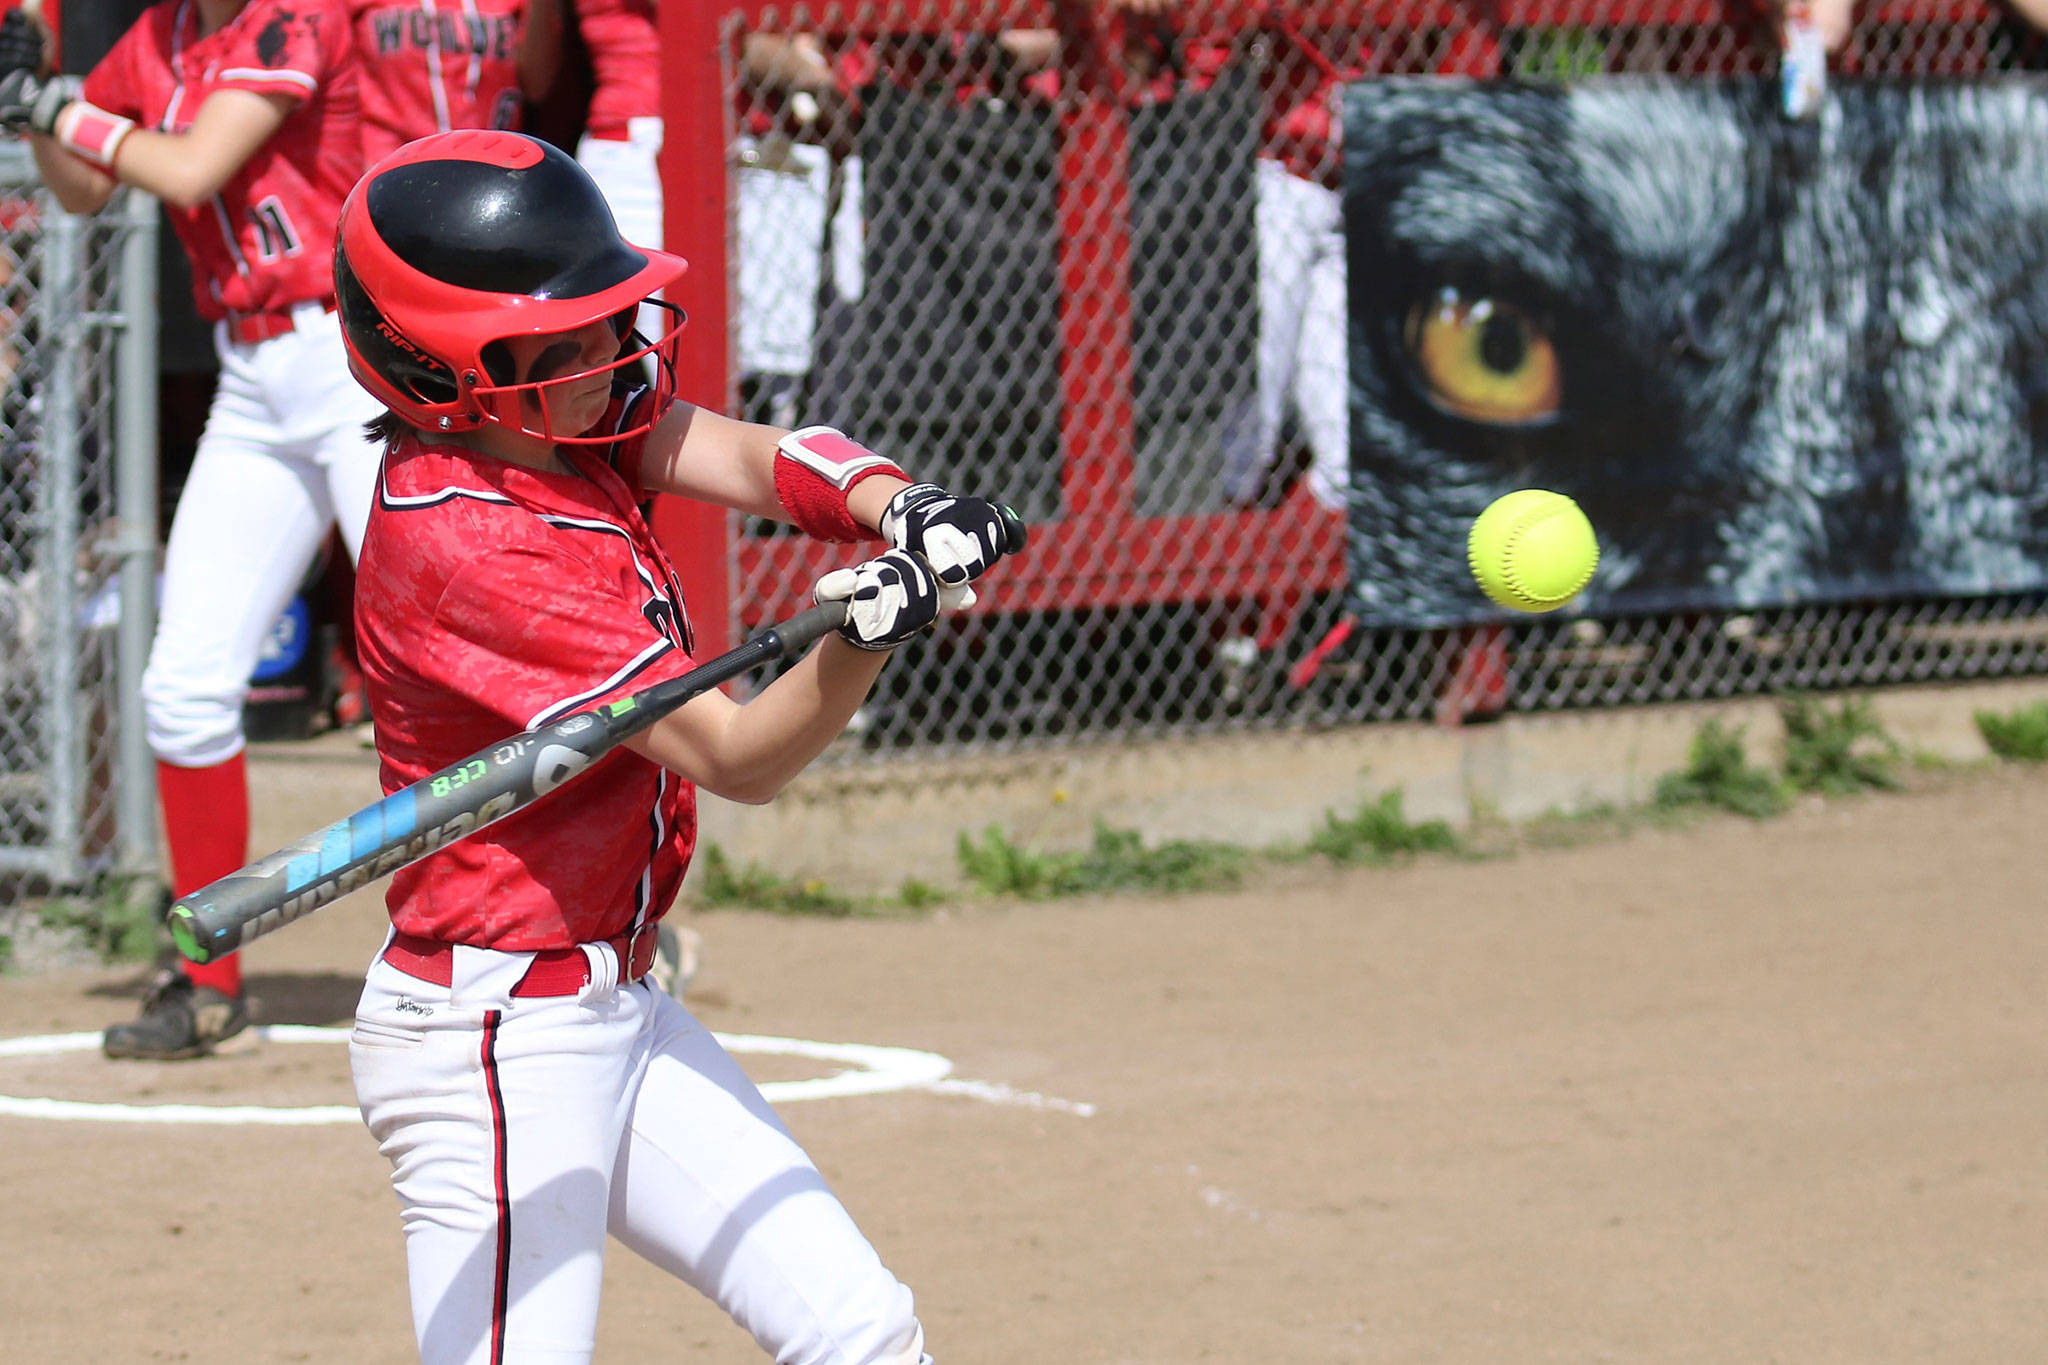 Senior Jae LeVine goes after a pitch in her final home game. (Photo by John Fisken)